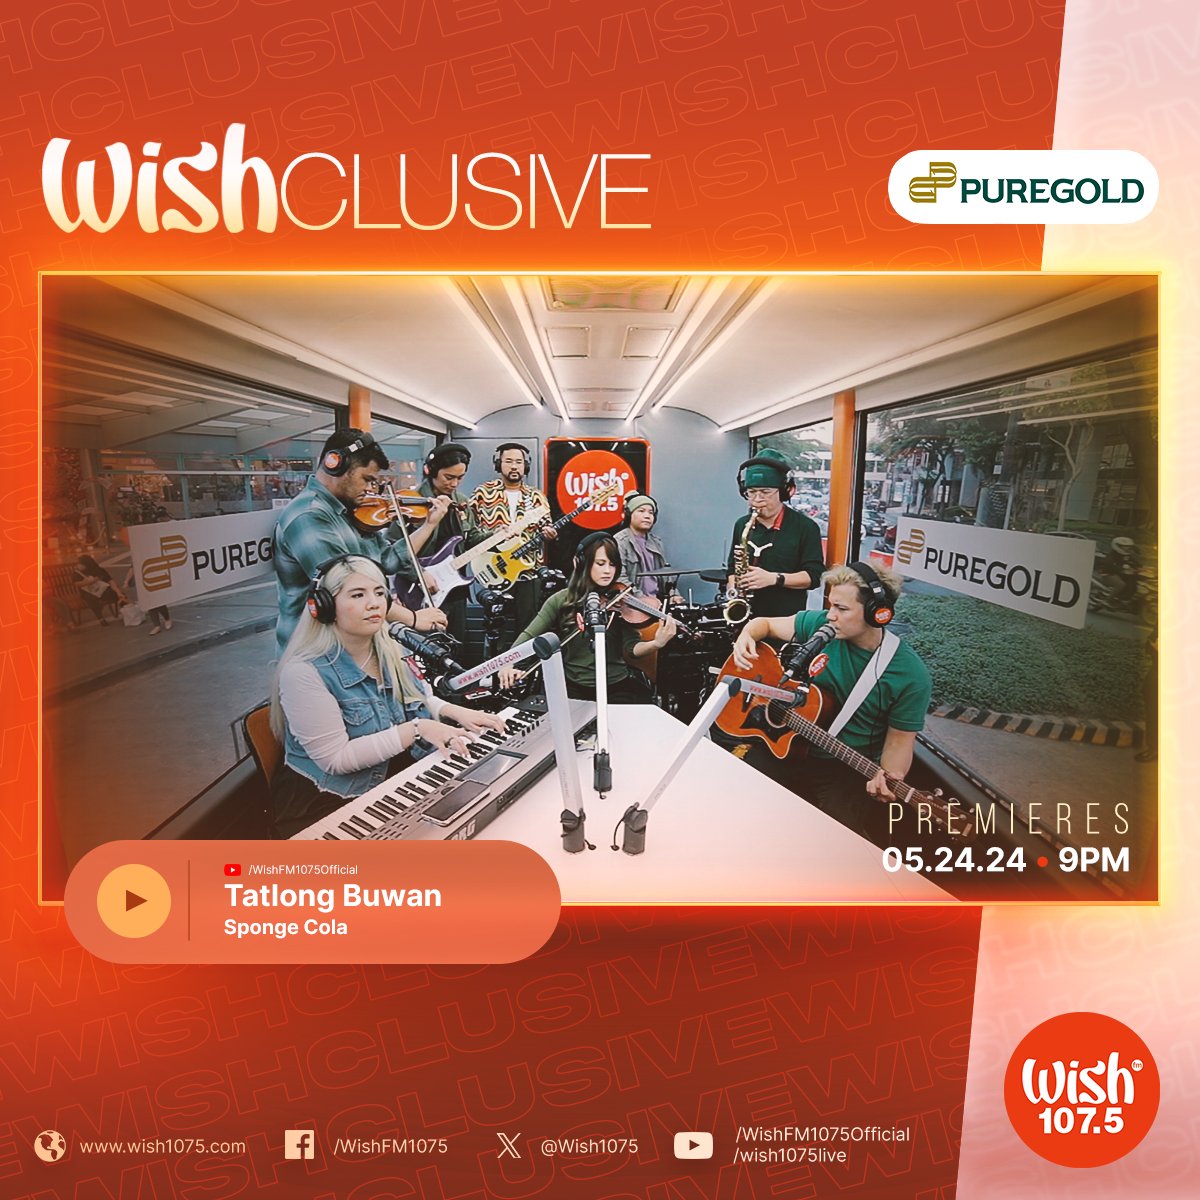 Taking inspiration from the hit K-drama, @SpongeColaPH brings their 'Queen of Tears'-themed track to the Wish Bus for their newest Wishclusive. Catch tonight's Wishclusive premiere of 'Tatlong Buwan' on our YouTube channel! This Wishclusive is presented by @Puregold_PH.